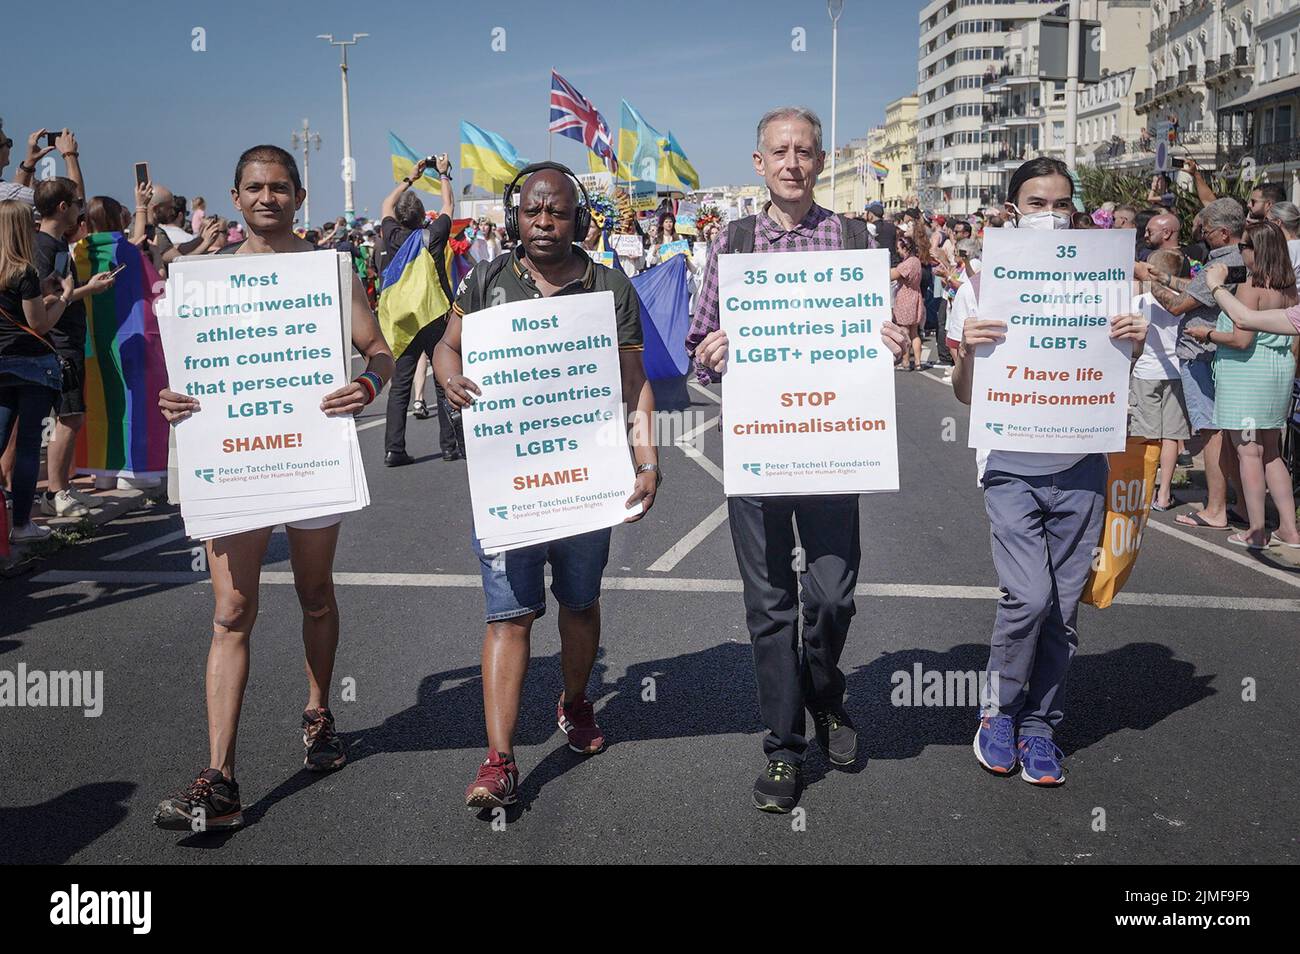 East Sussex, UK. 6th August 2022. Brighton and Hove Pride 2022. Human rights campaigner Peter Tatchell (2nd Right)joins the parade as thousands attend the annual LGBT+ celebration march from Hove Lawns to Preston Park. Credit: Guy Corbishley/Alamy Live News Stock Photo